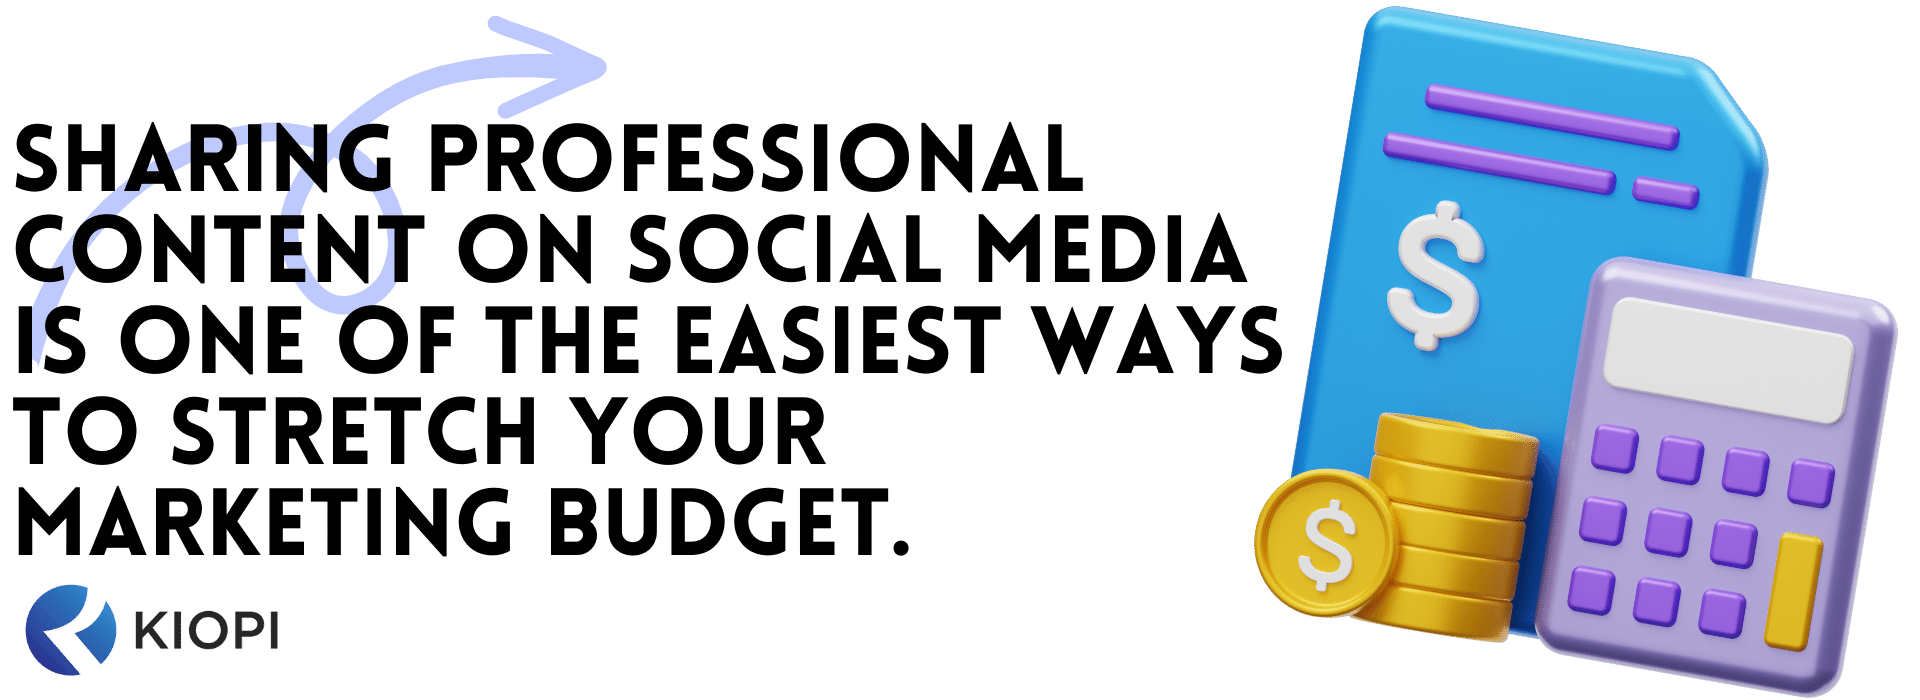 social media benefits for business owners